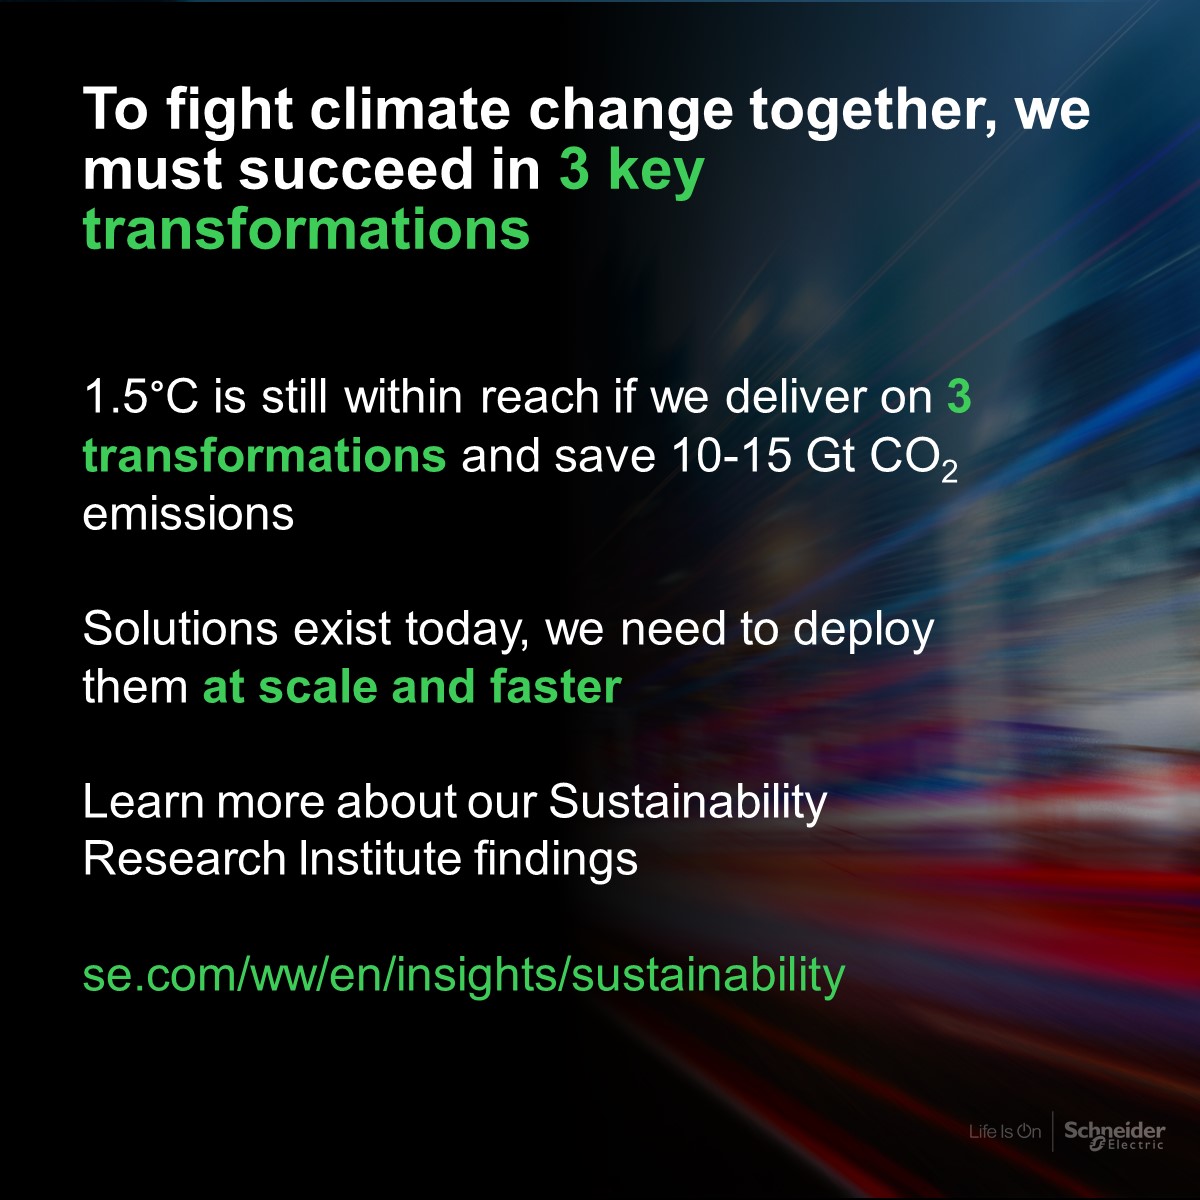 Time to tackle the demand side of the energy transition at #ClimateWeekNYC. Our Sustainability Research Institute reinforces our contribution to the #climate and #energy debate this week. Click to discover more: spr.ly/6014MTS0s

#ClimateWeekNYC #Impactcompany